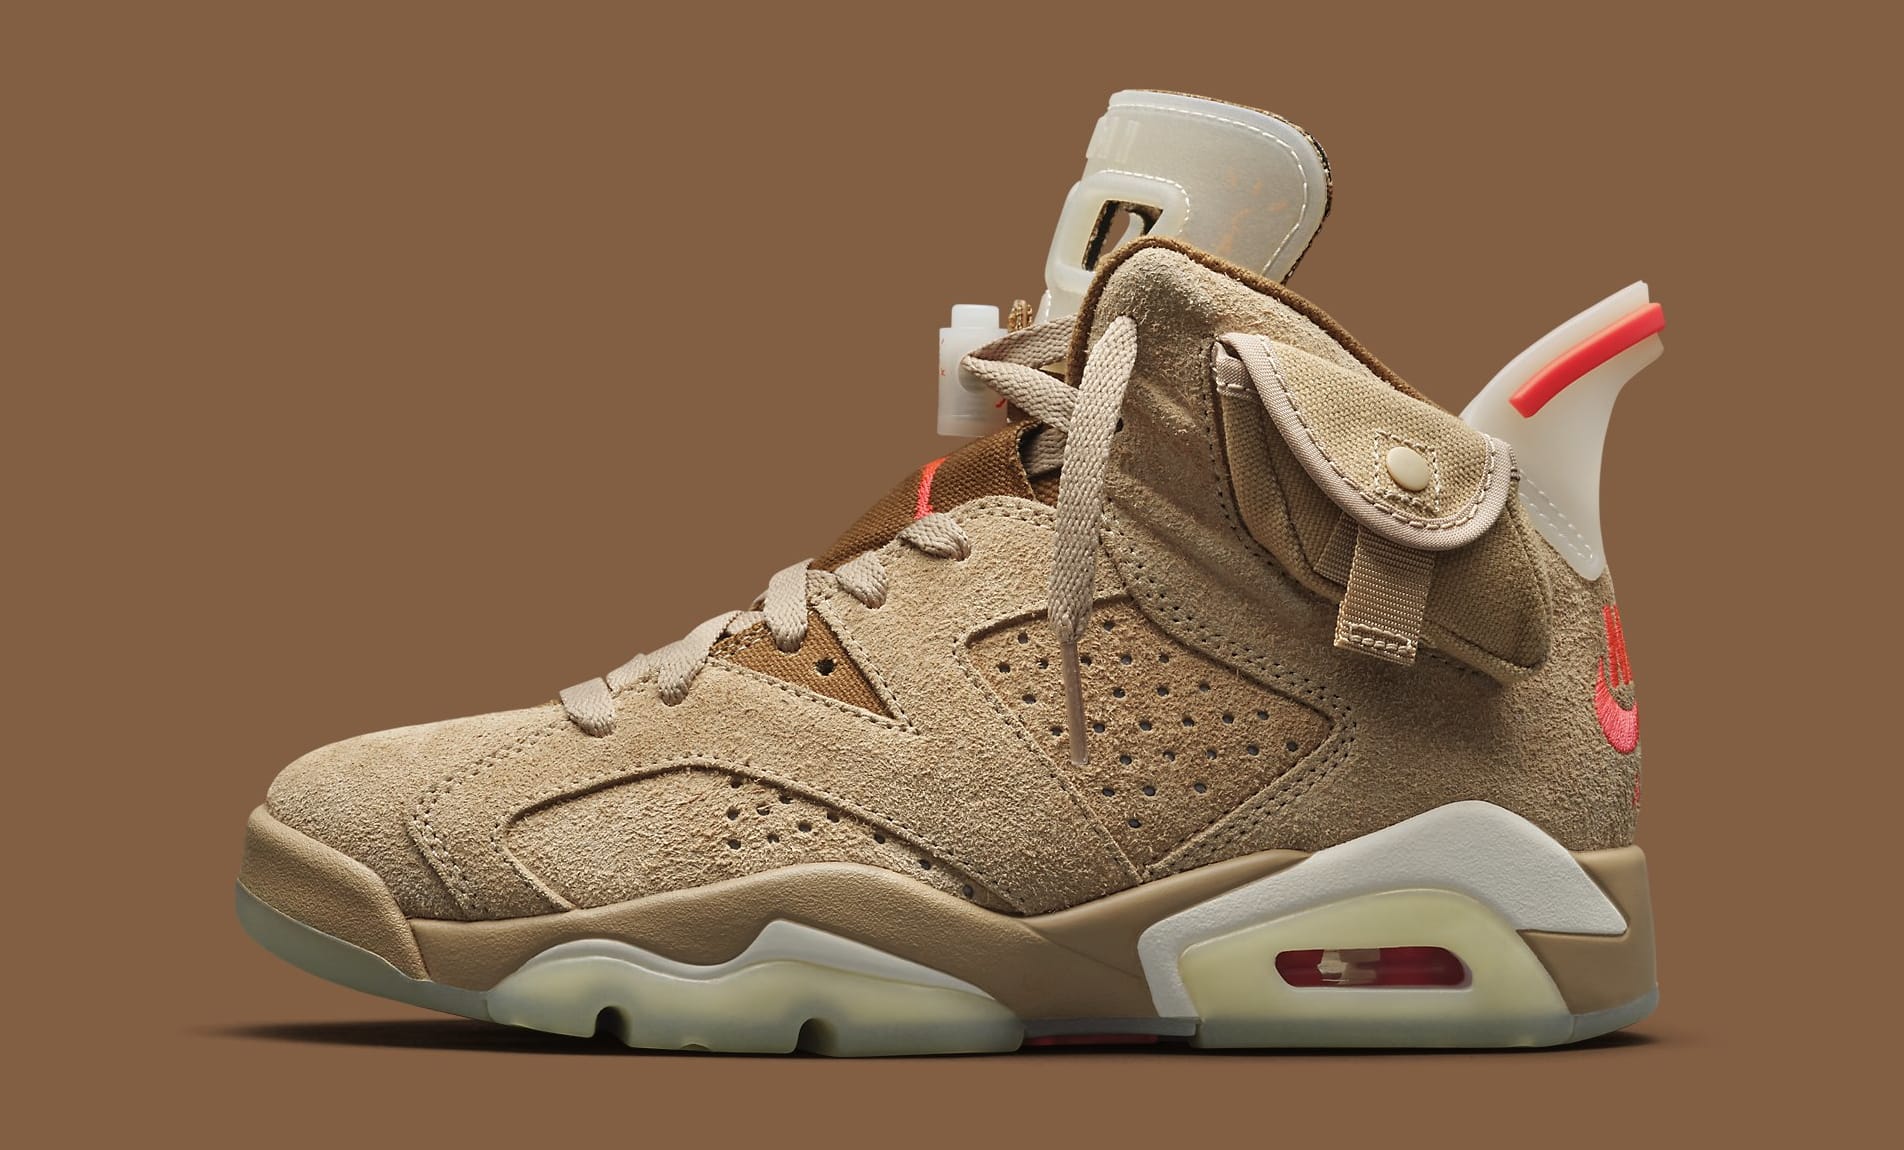 Travis Scott's new Air Jordan collaboration is ugly and in demand